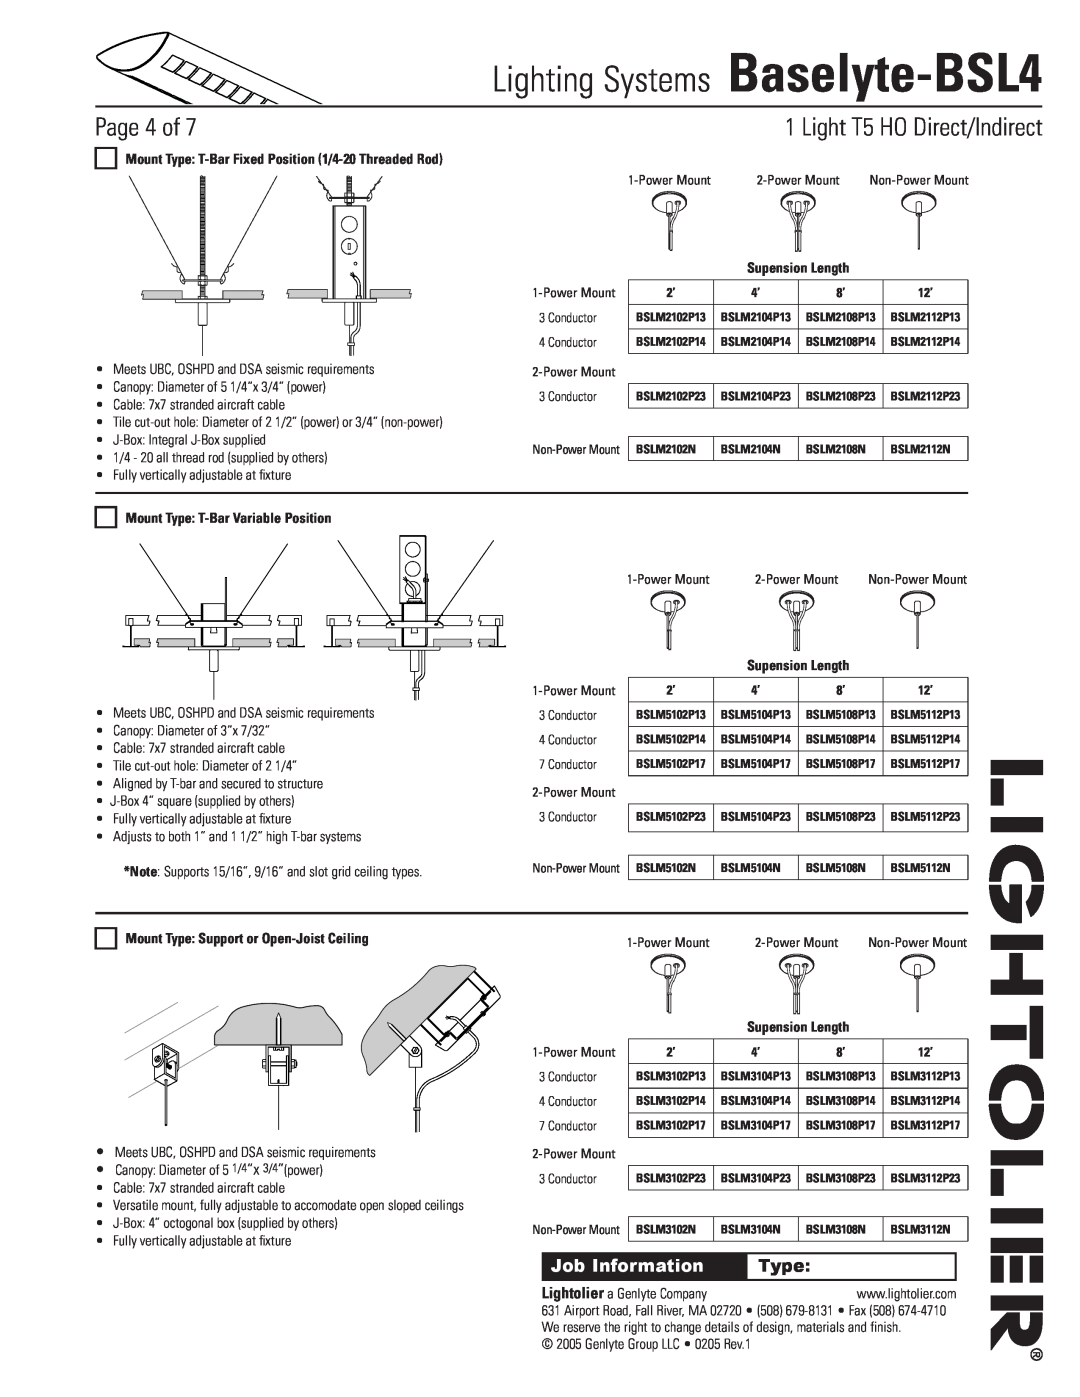 Lightolier Baselyte-BSL4 specifications Mount Type T-BarVariable Position, Mount Type Support or Open-JoistCeiling, Page of 